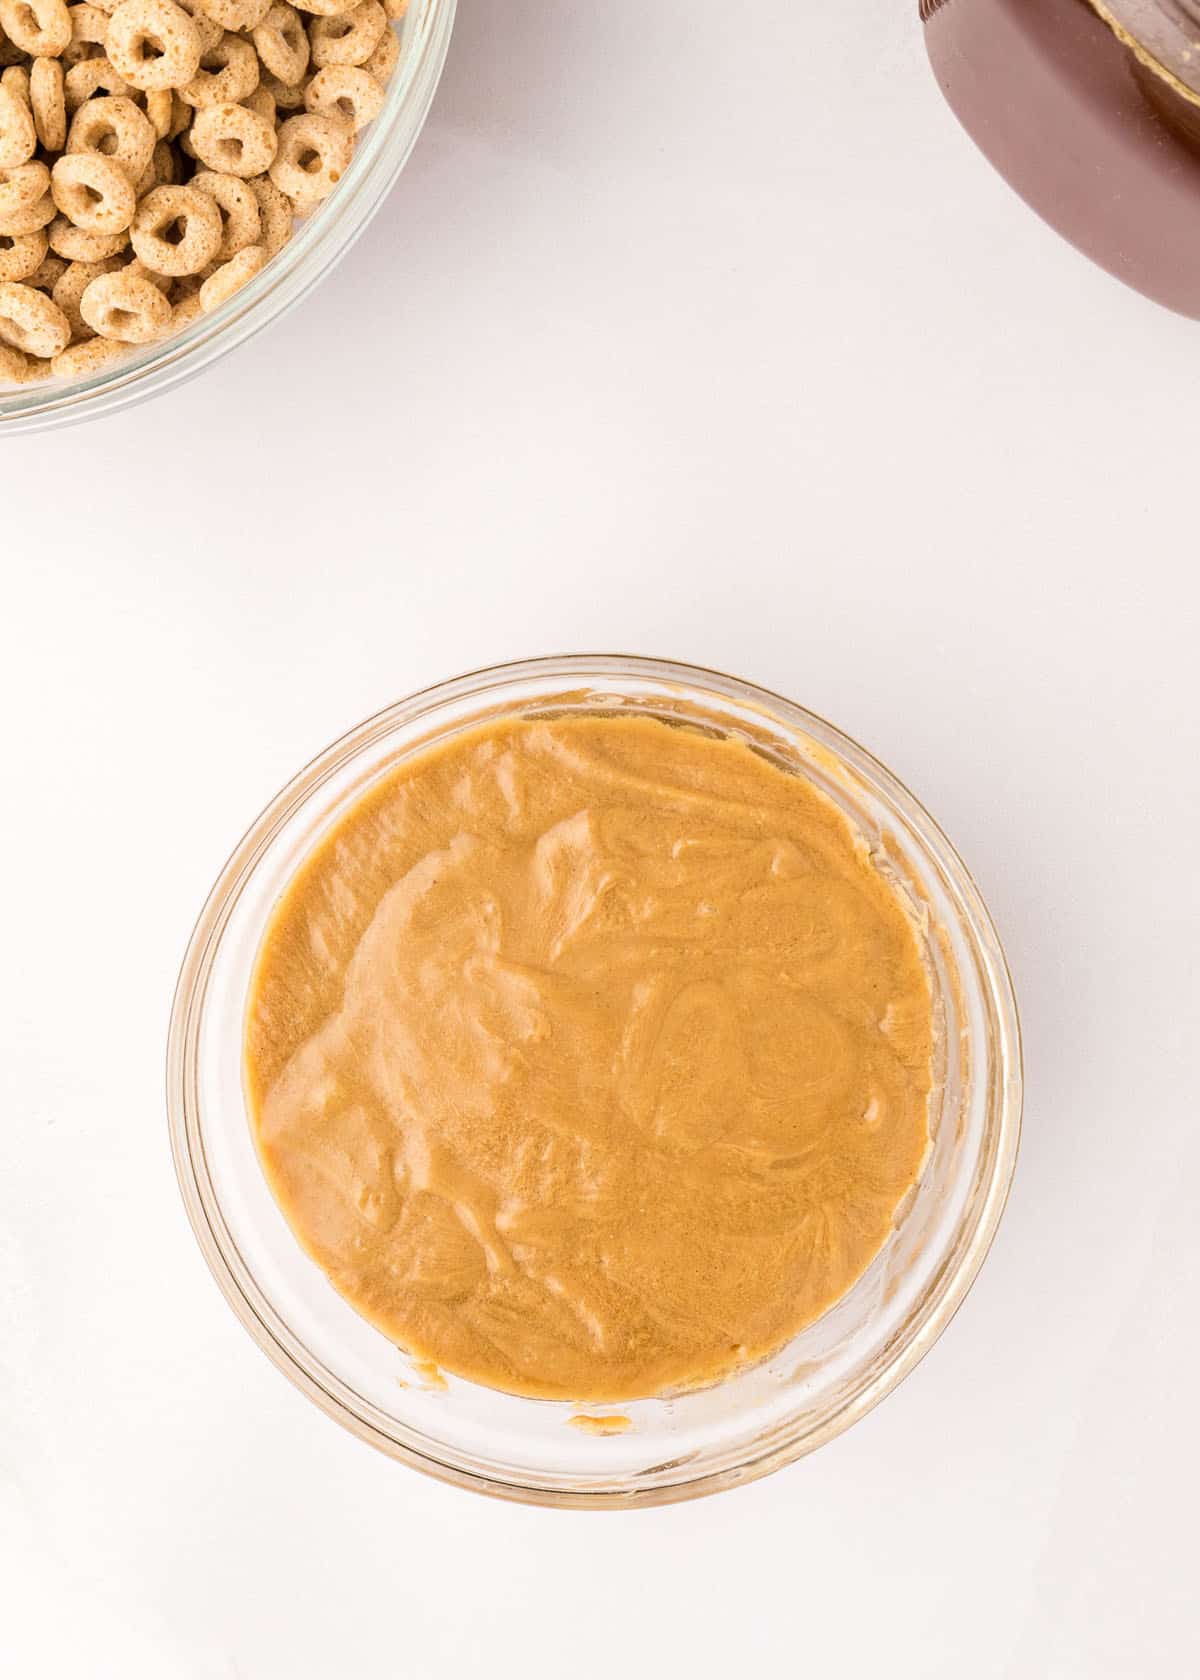 Honey and peanut butter mixed together in a glass mixing bowl.